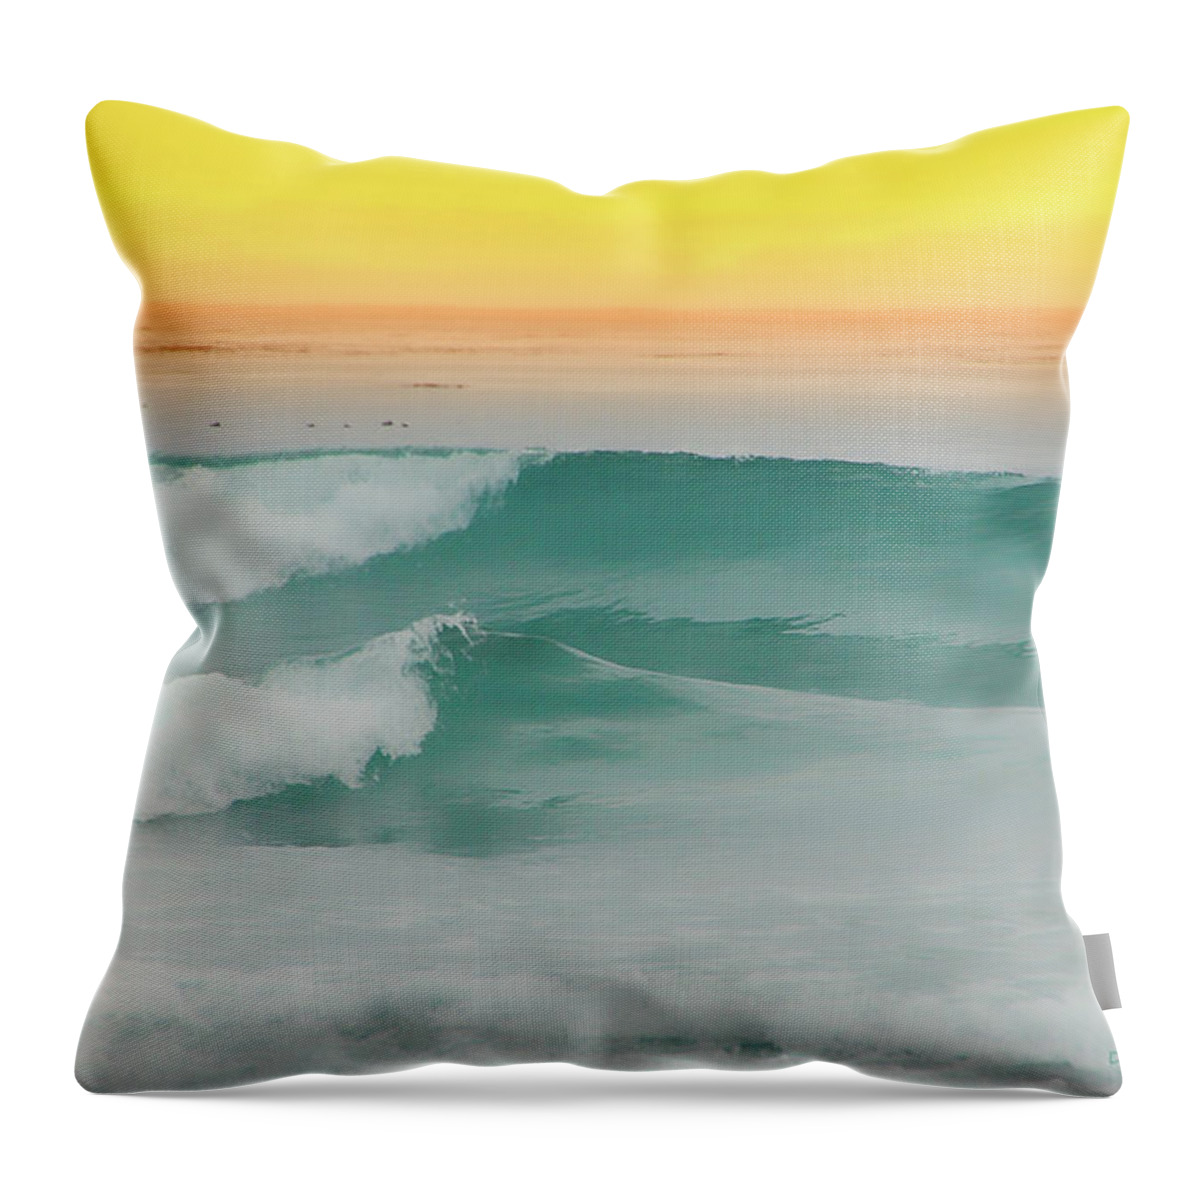 California Throw Pillow featuring the photograph Just A Dream by Donna Blackhall